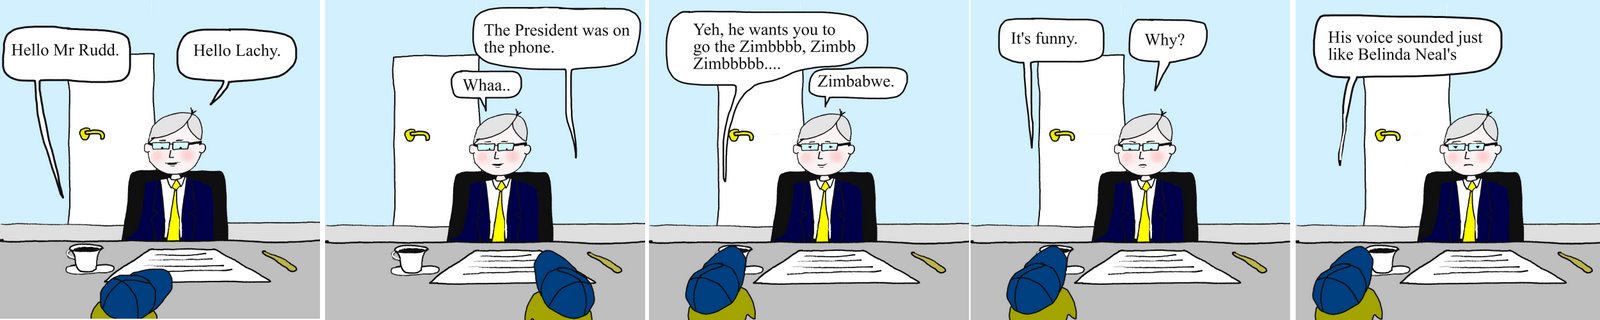 [Kevin+and+Lachy+discuss+Zimbabwe.jpg]